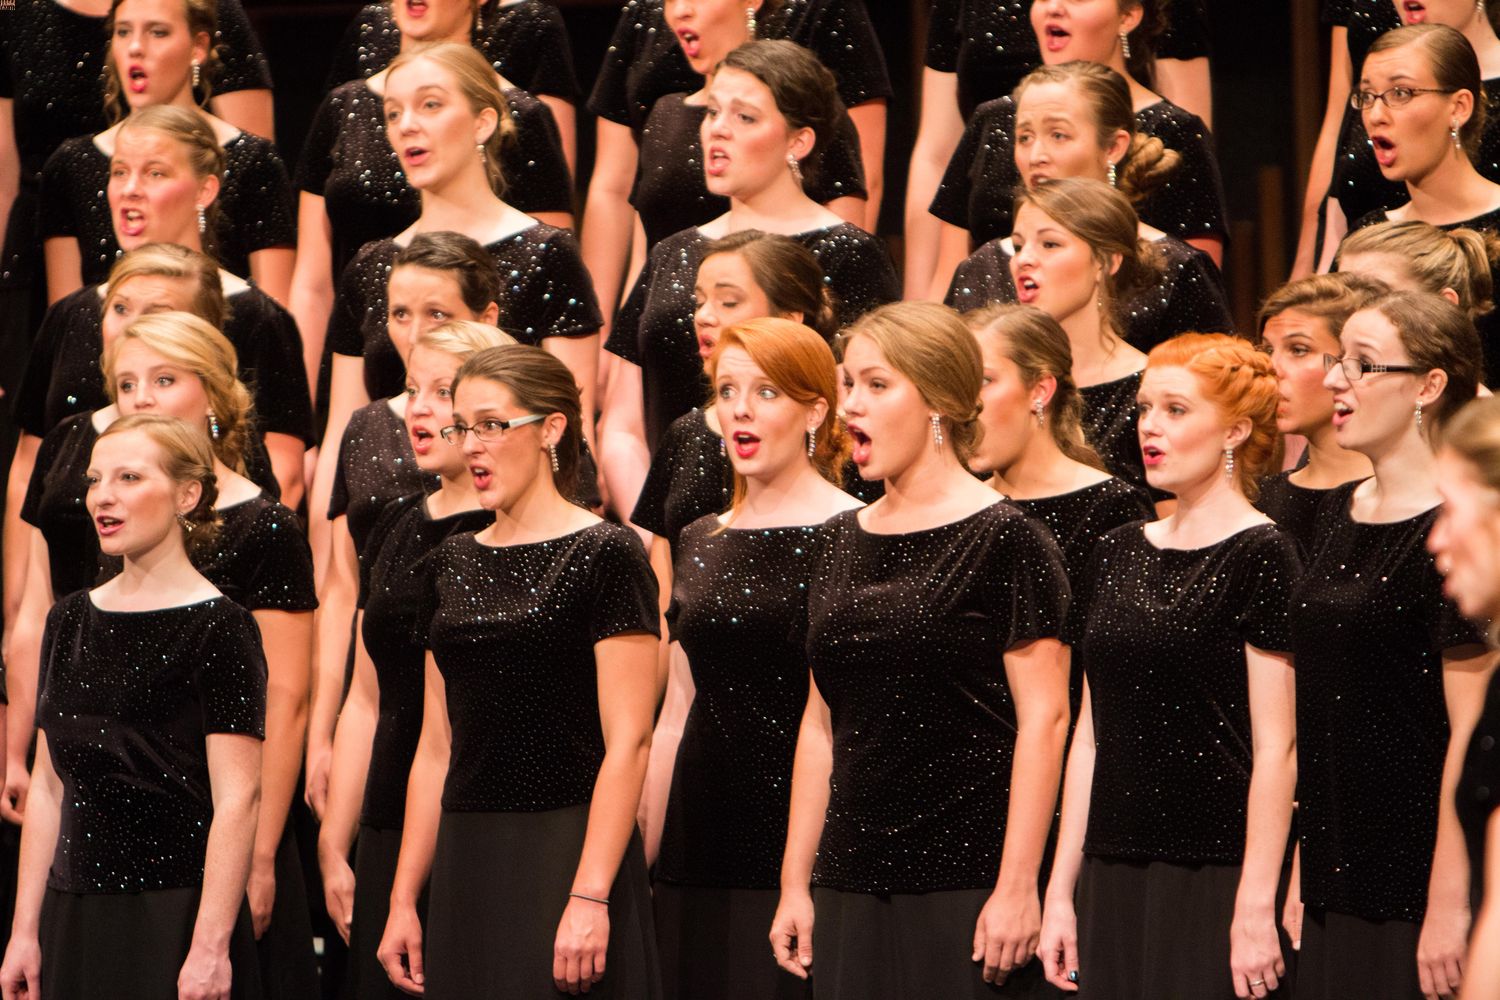 When Singing, Who Are The Highest Singers In Choir?